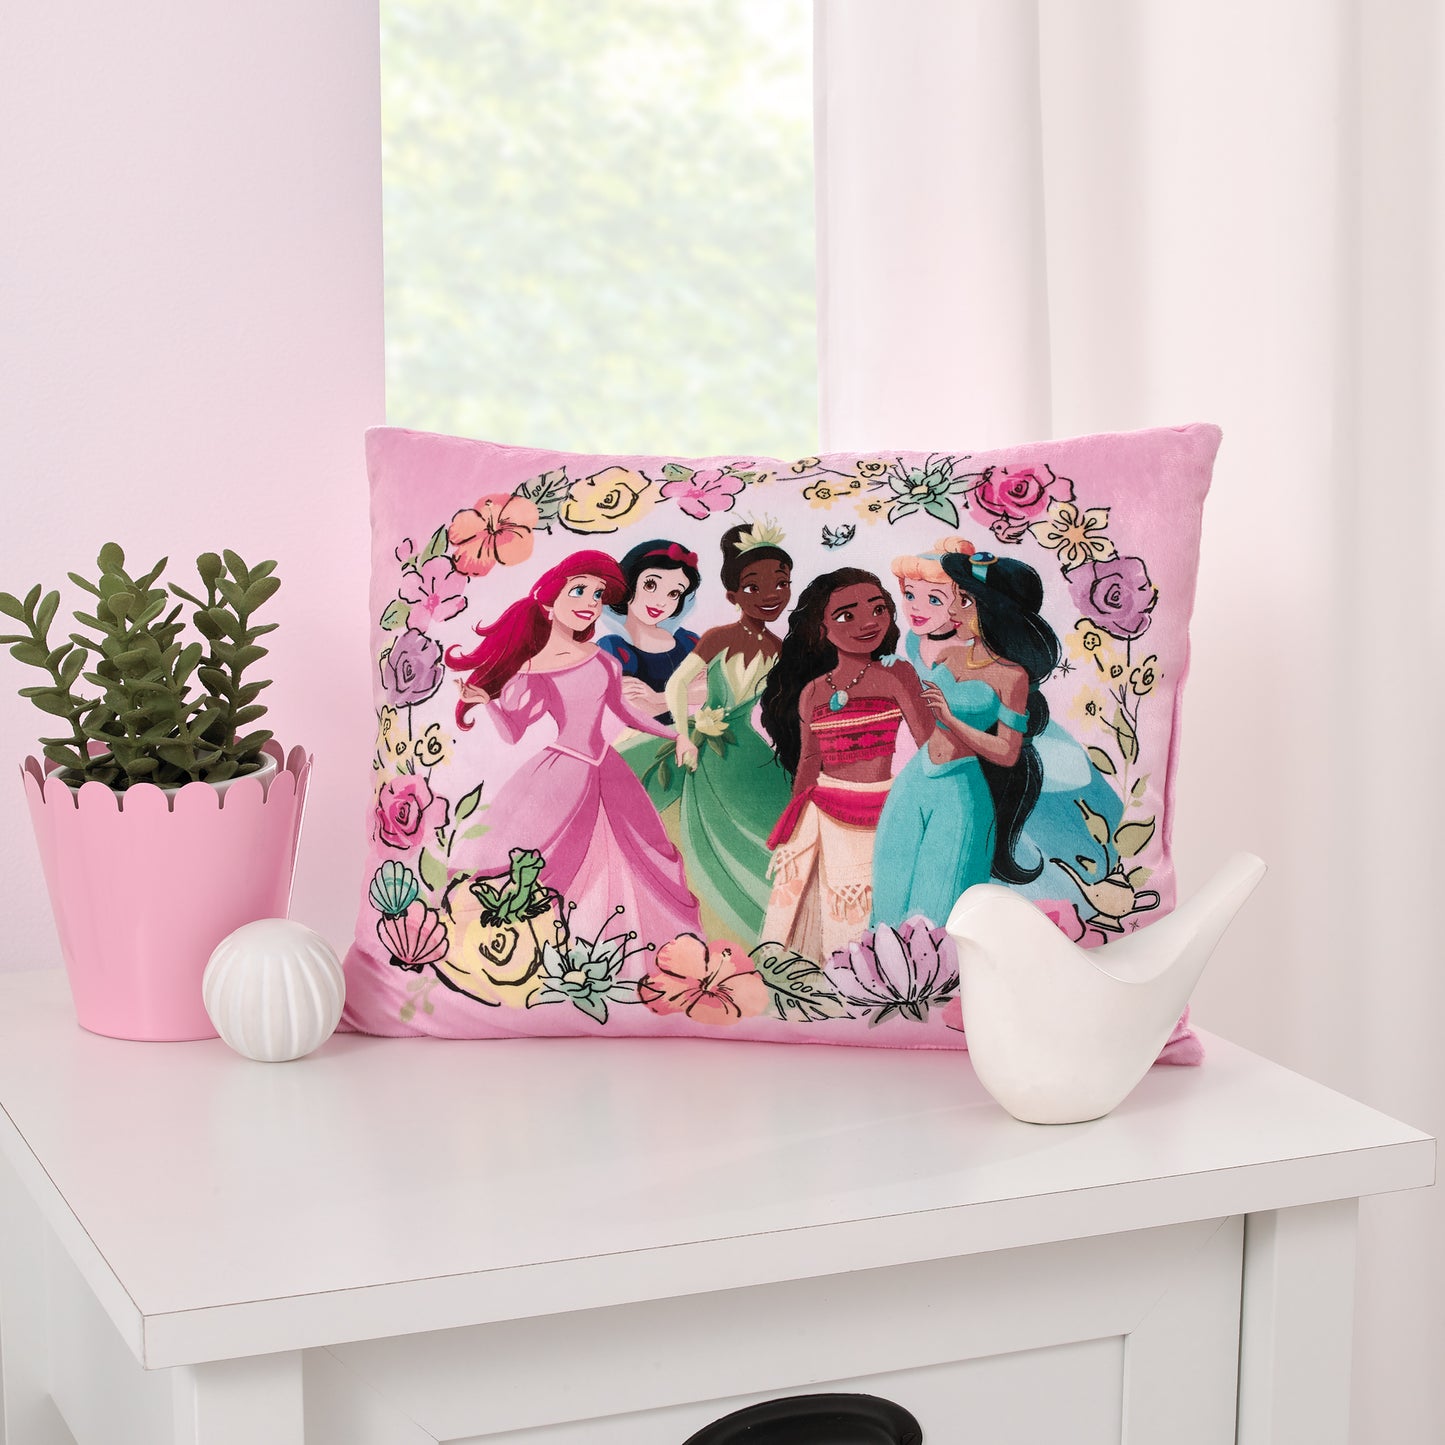 Disney Princesses Courage and Kindness Pink, Blue, Green and Yellow Ariel and Snow White, Tiana and Moana, Cinderella, and Jasmine Toddler Pillow